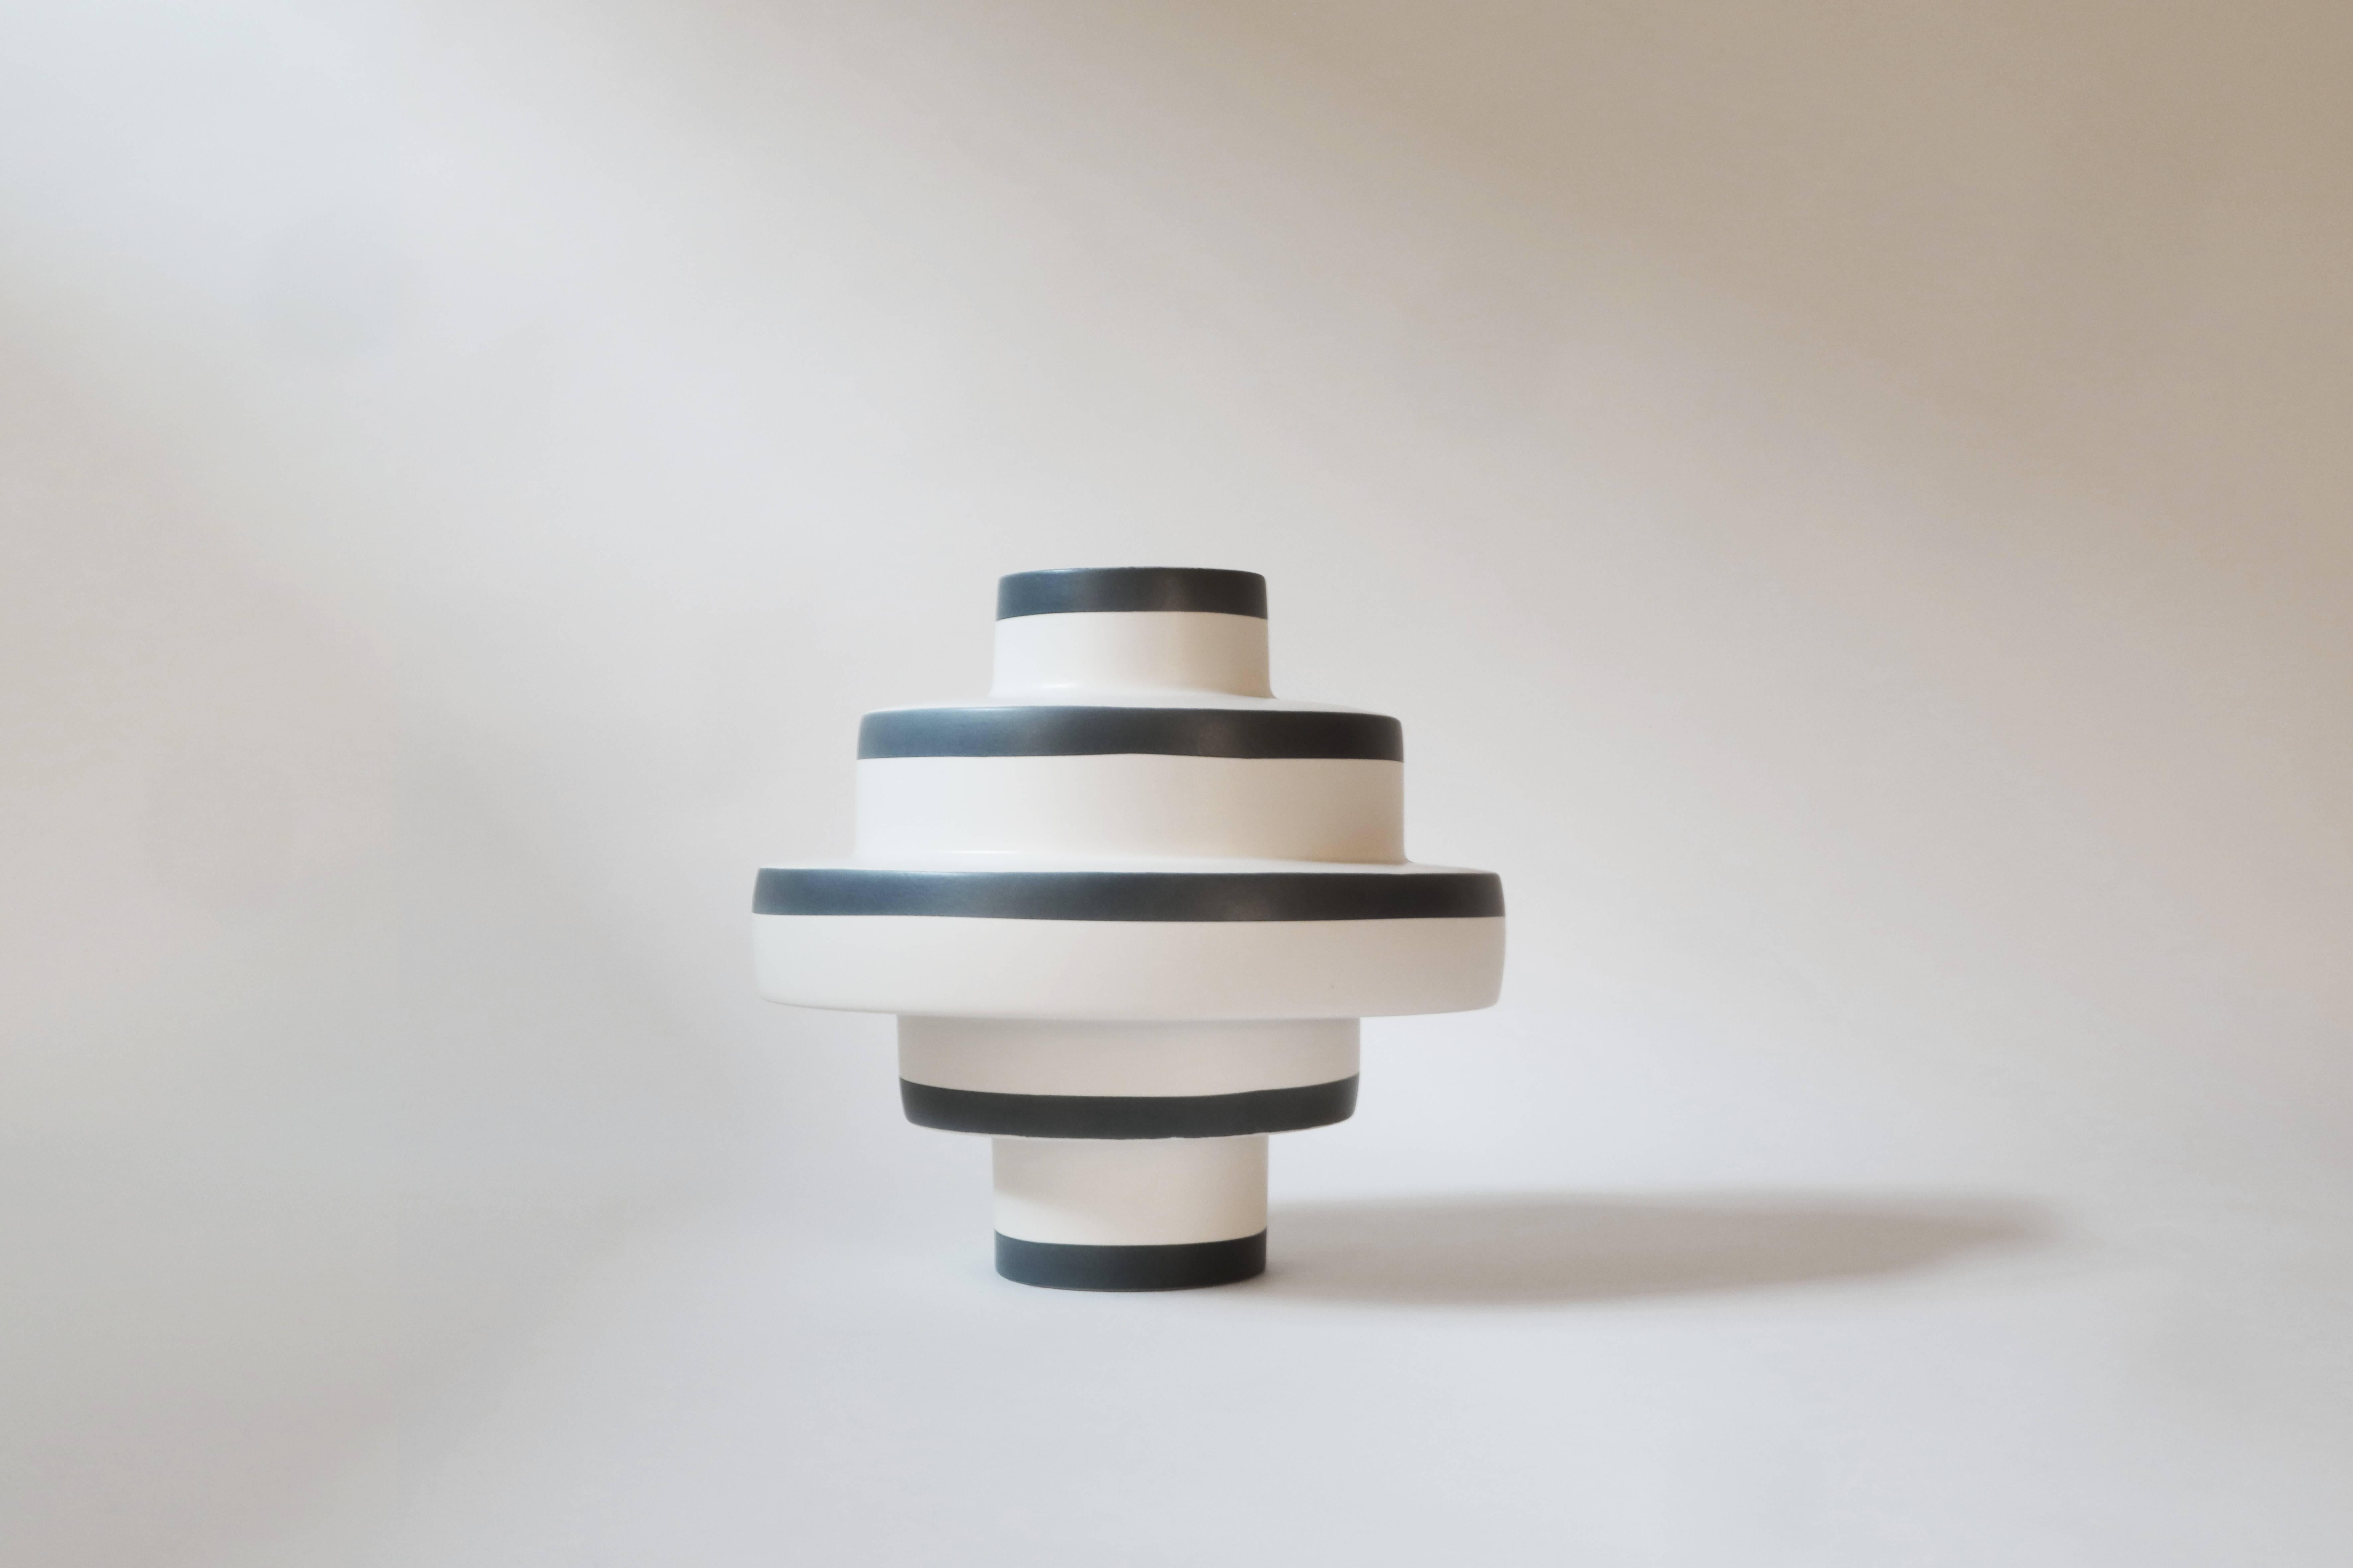 Montèe vase designed by Simona Cardinetti

Limited Edition of 6 pieces

Handmade in Italy

Manufactured by Bitossi Ceramiche

Materials: Ceramic
 